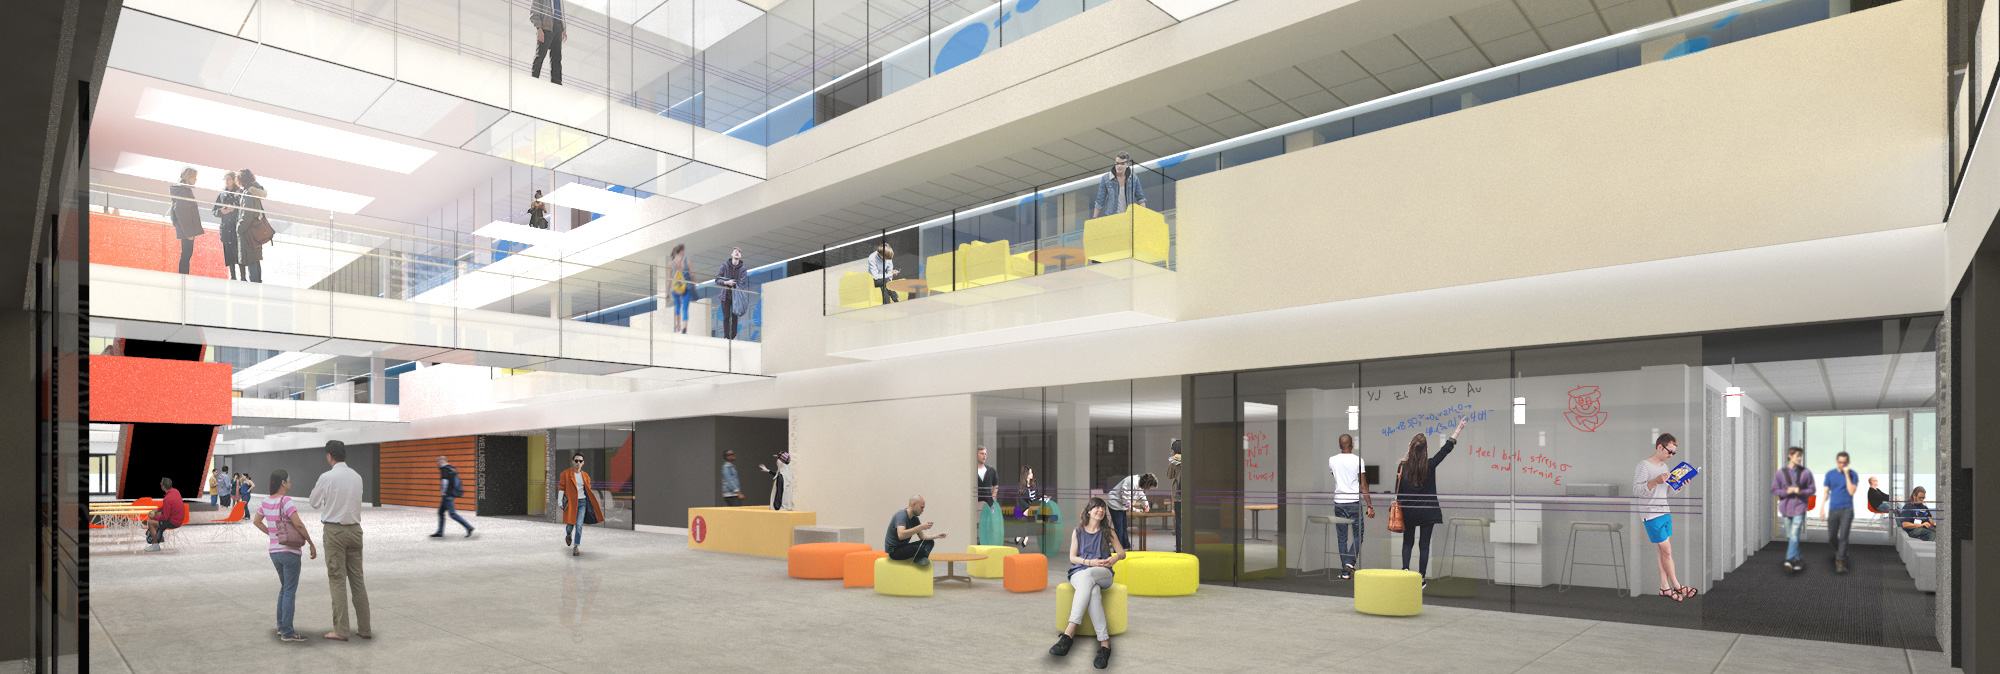 Artist rendering of the interior of the Innovation and Wellness Centre